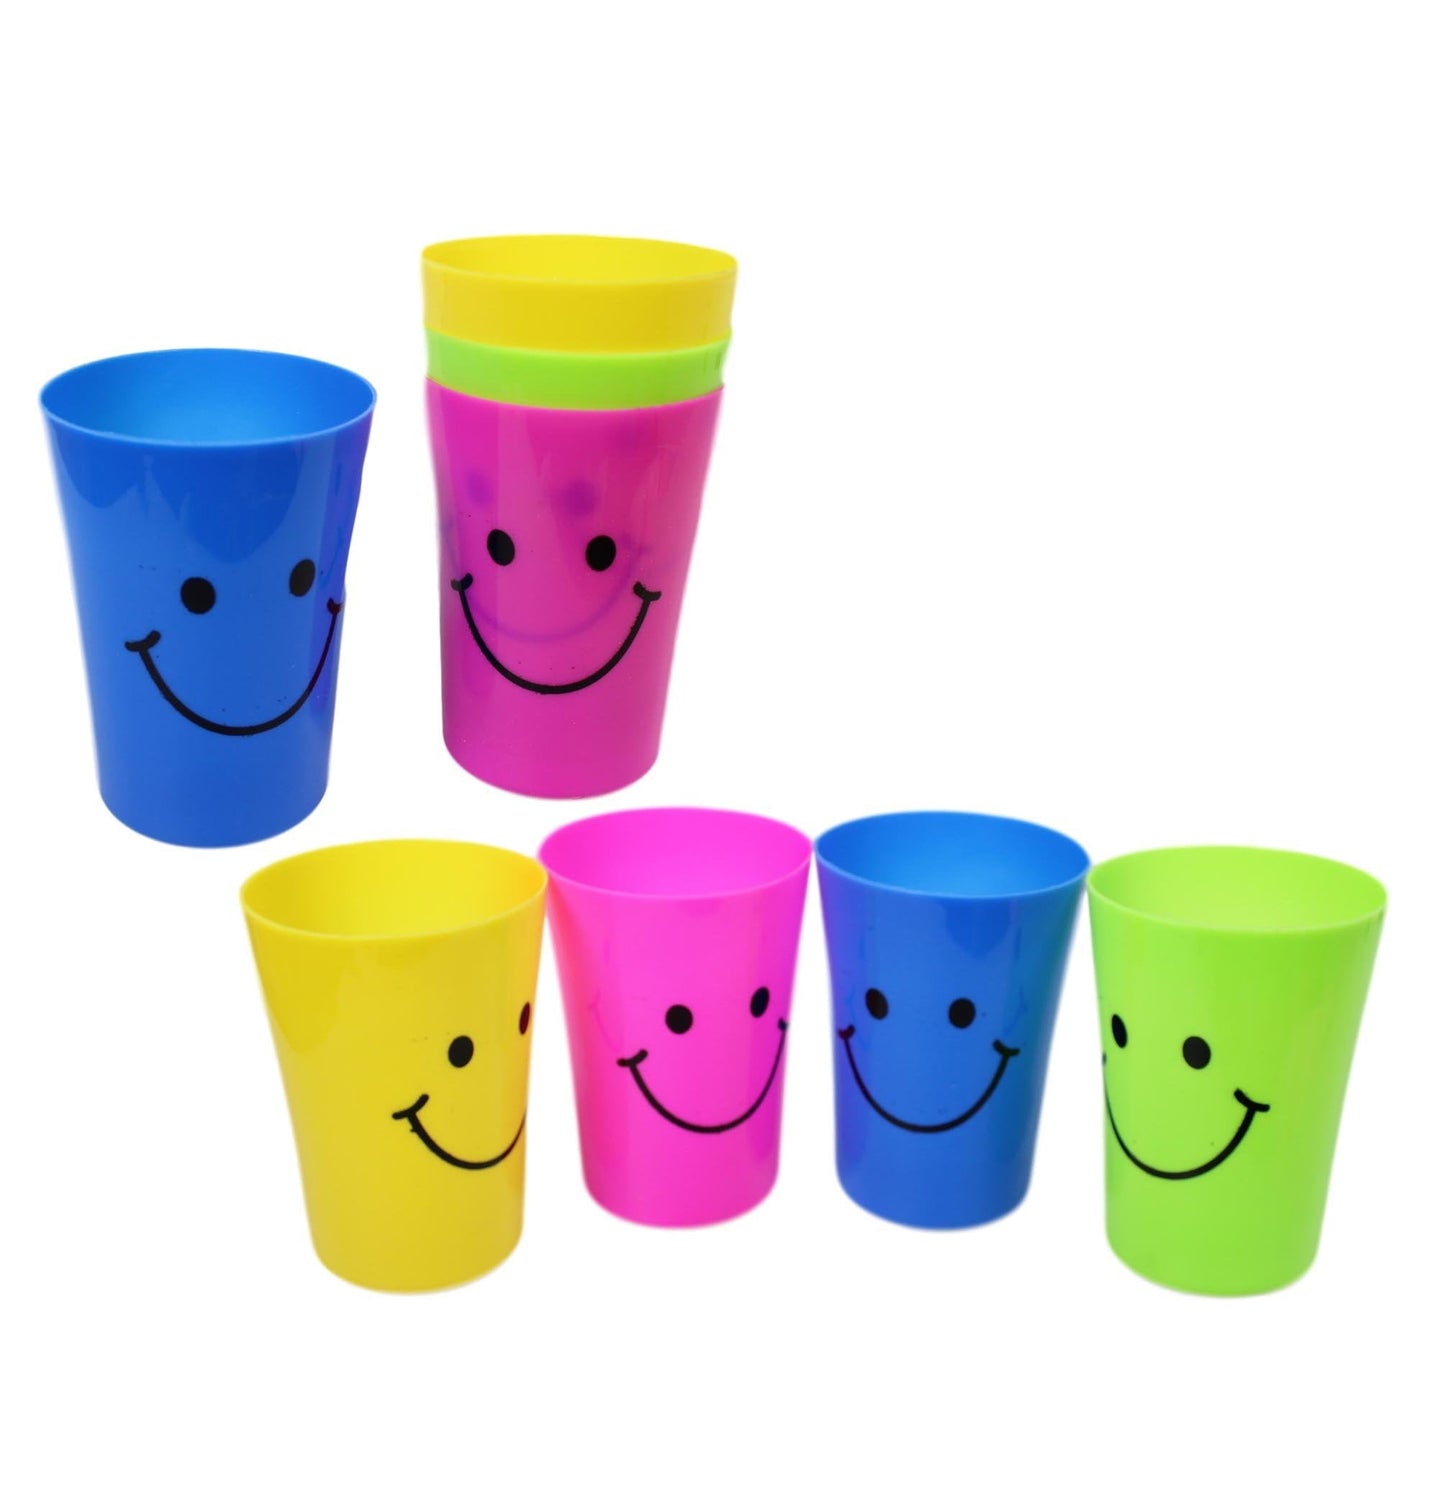 Children's Plastic Smiley Face Party Glasses Cups Pack of 4 0439 (Parcel Rate)